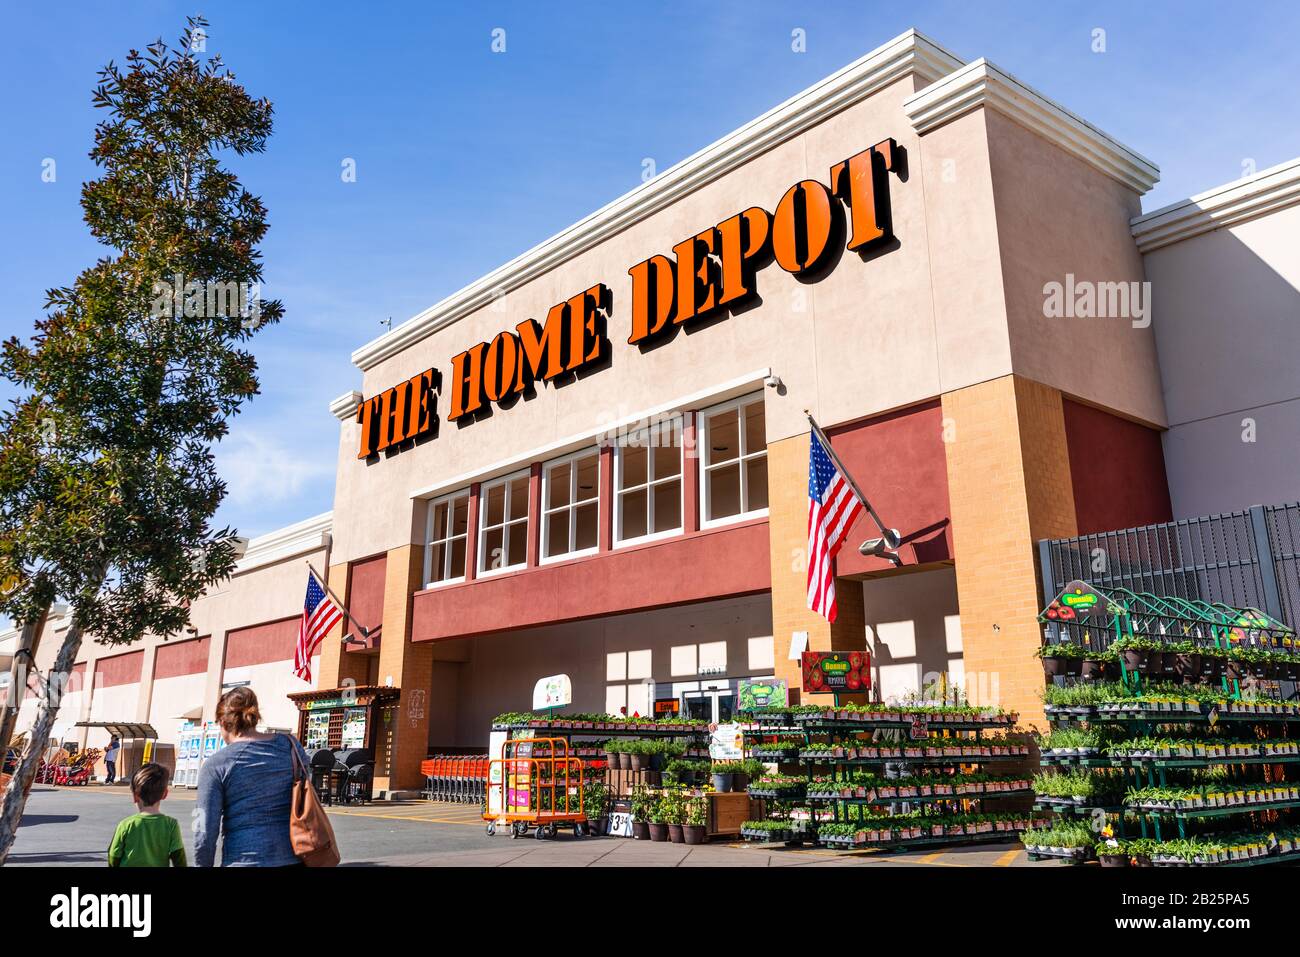 Feb 19, 2020 San Mateo / CA / USA - People shopping at Home Depot in San Francisco bay area; The Home Depot, Inc. is the largest home improvement reta Stock Photo